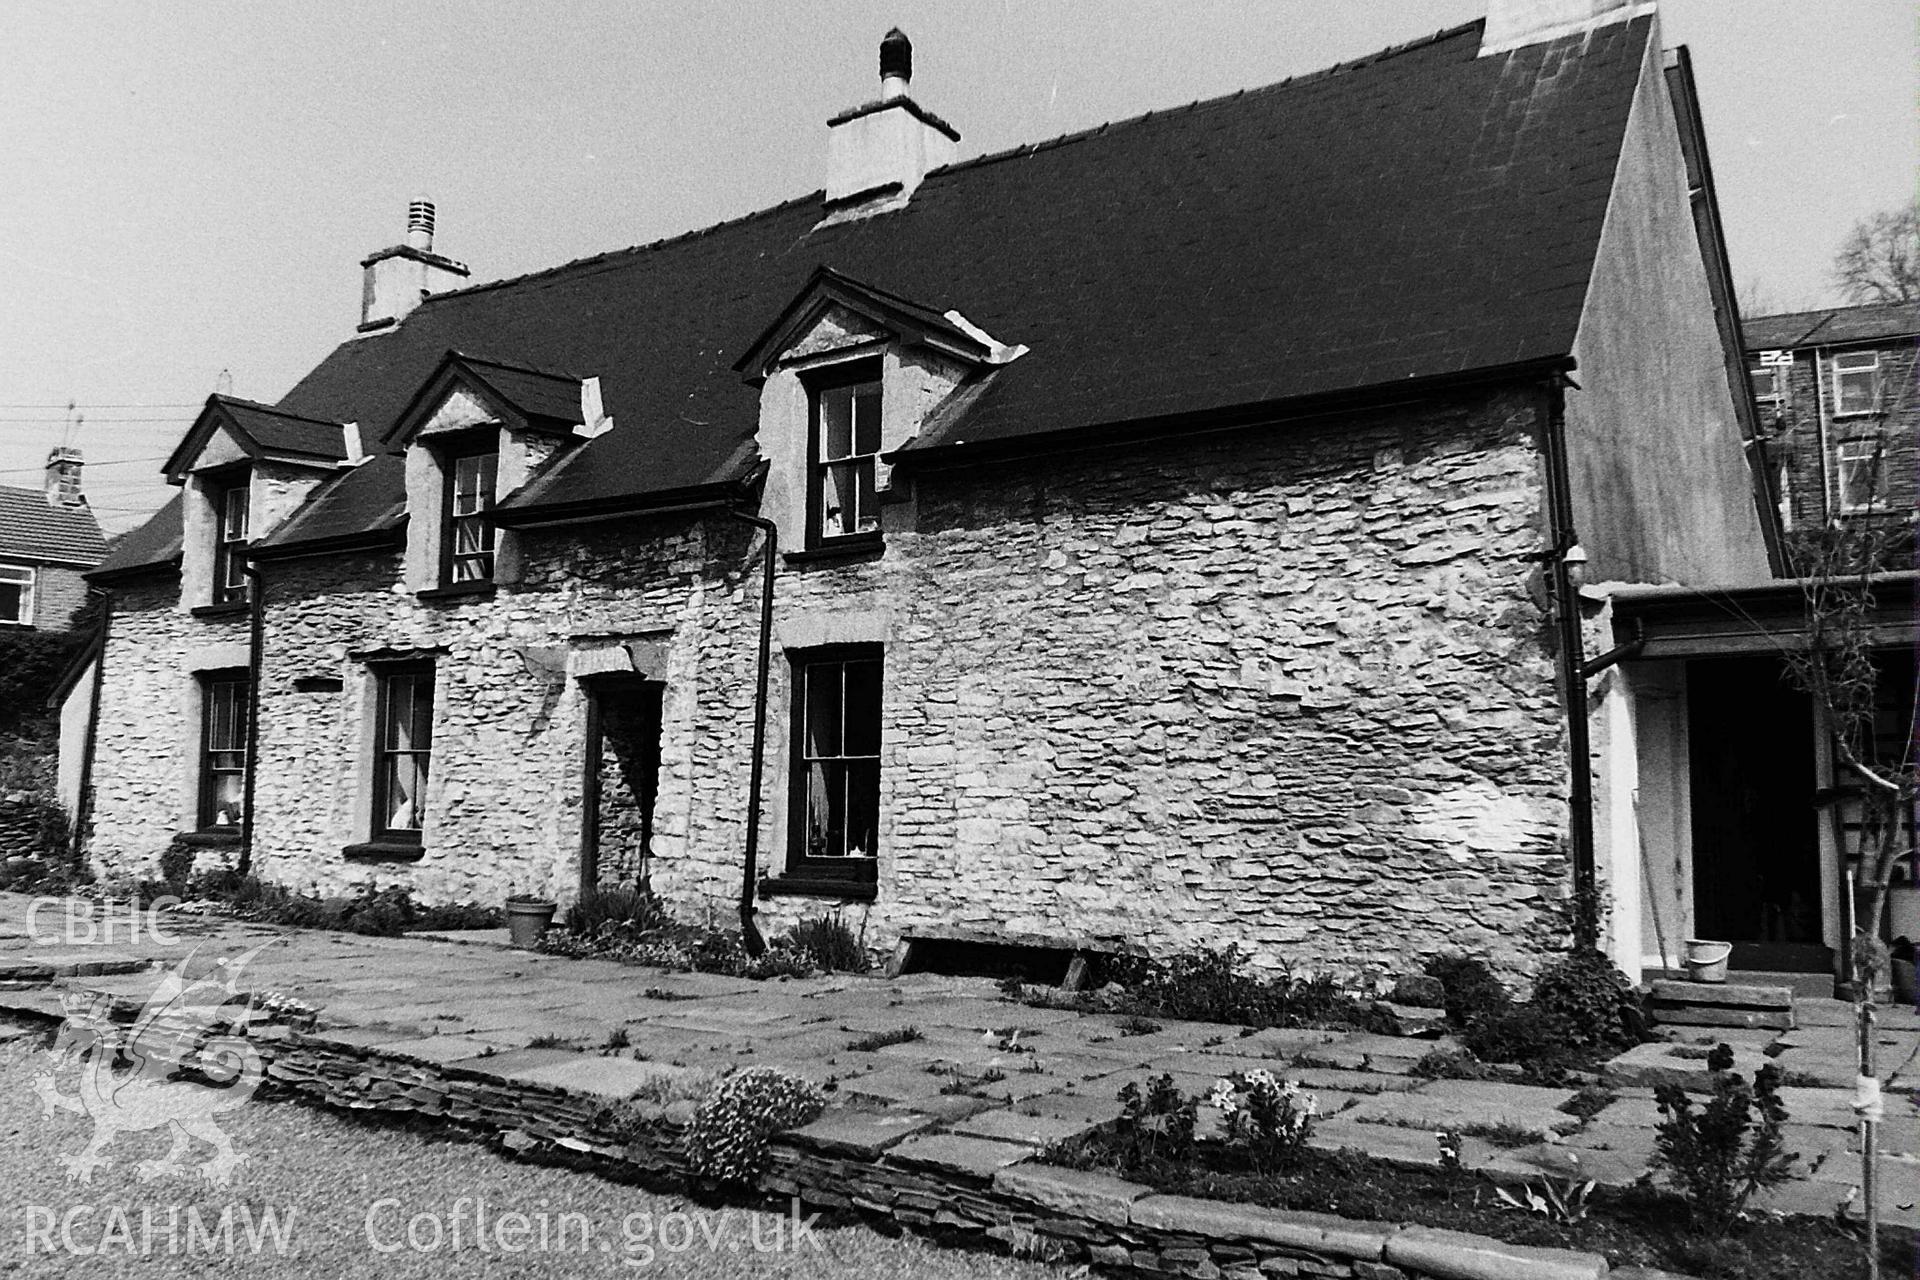 Digitised black and white photograph showing front elevation of Troedrhiwtrwyn farmhouse, produced by Paul Davis in 1985